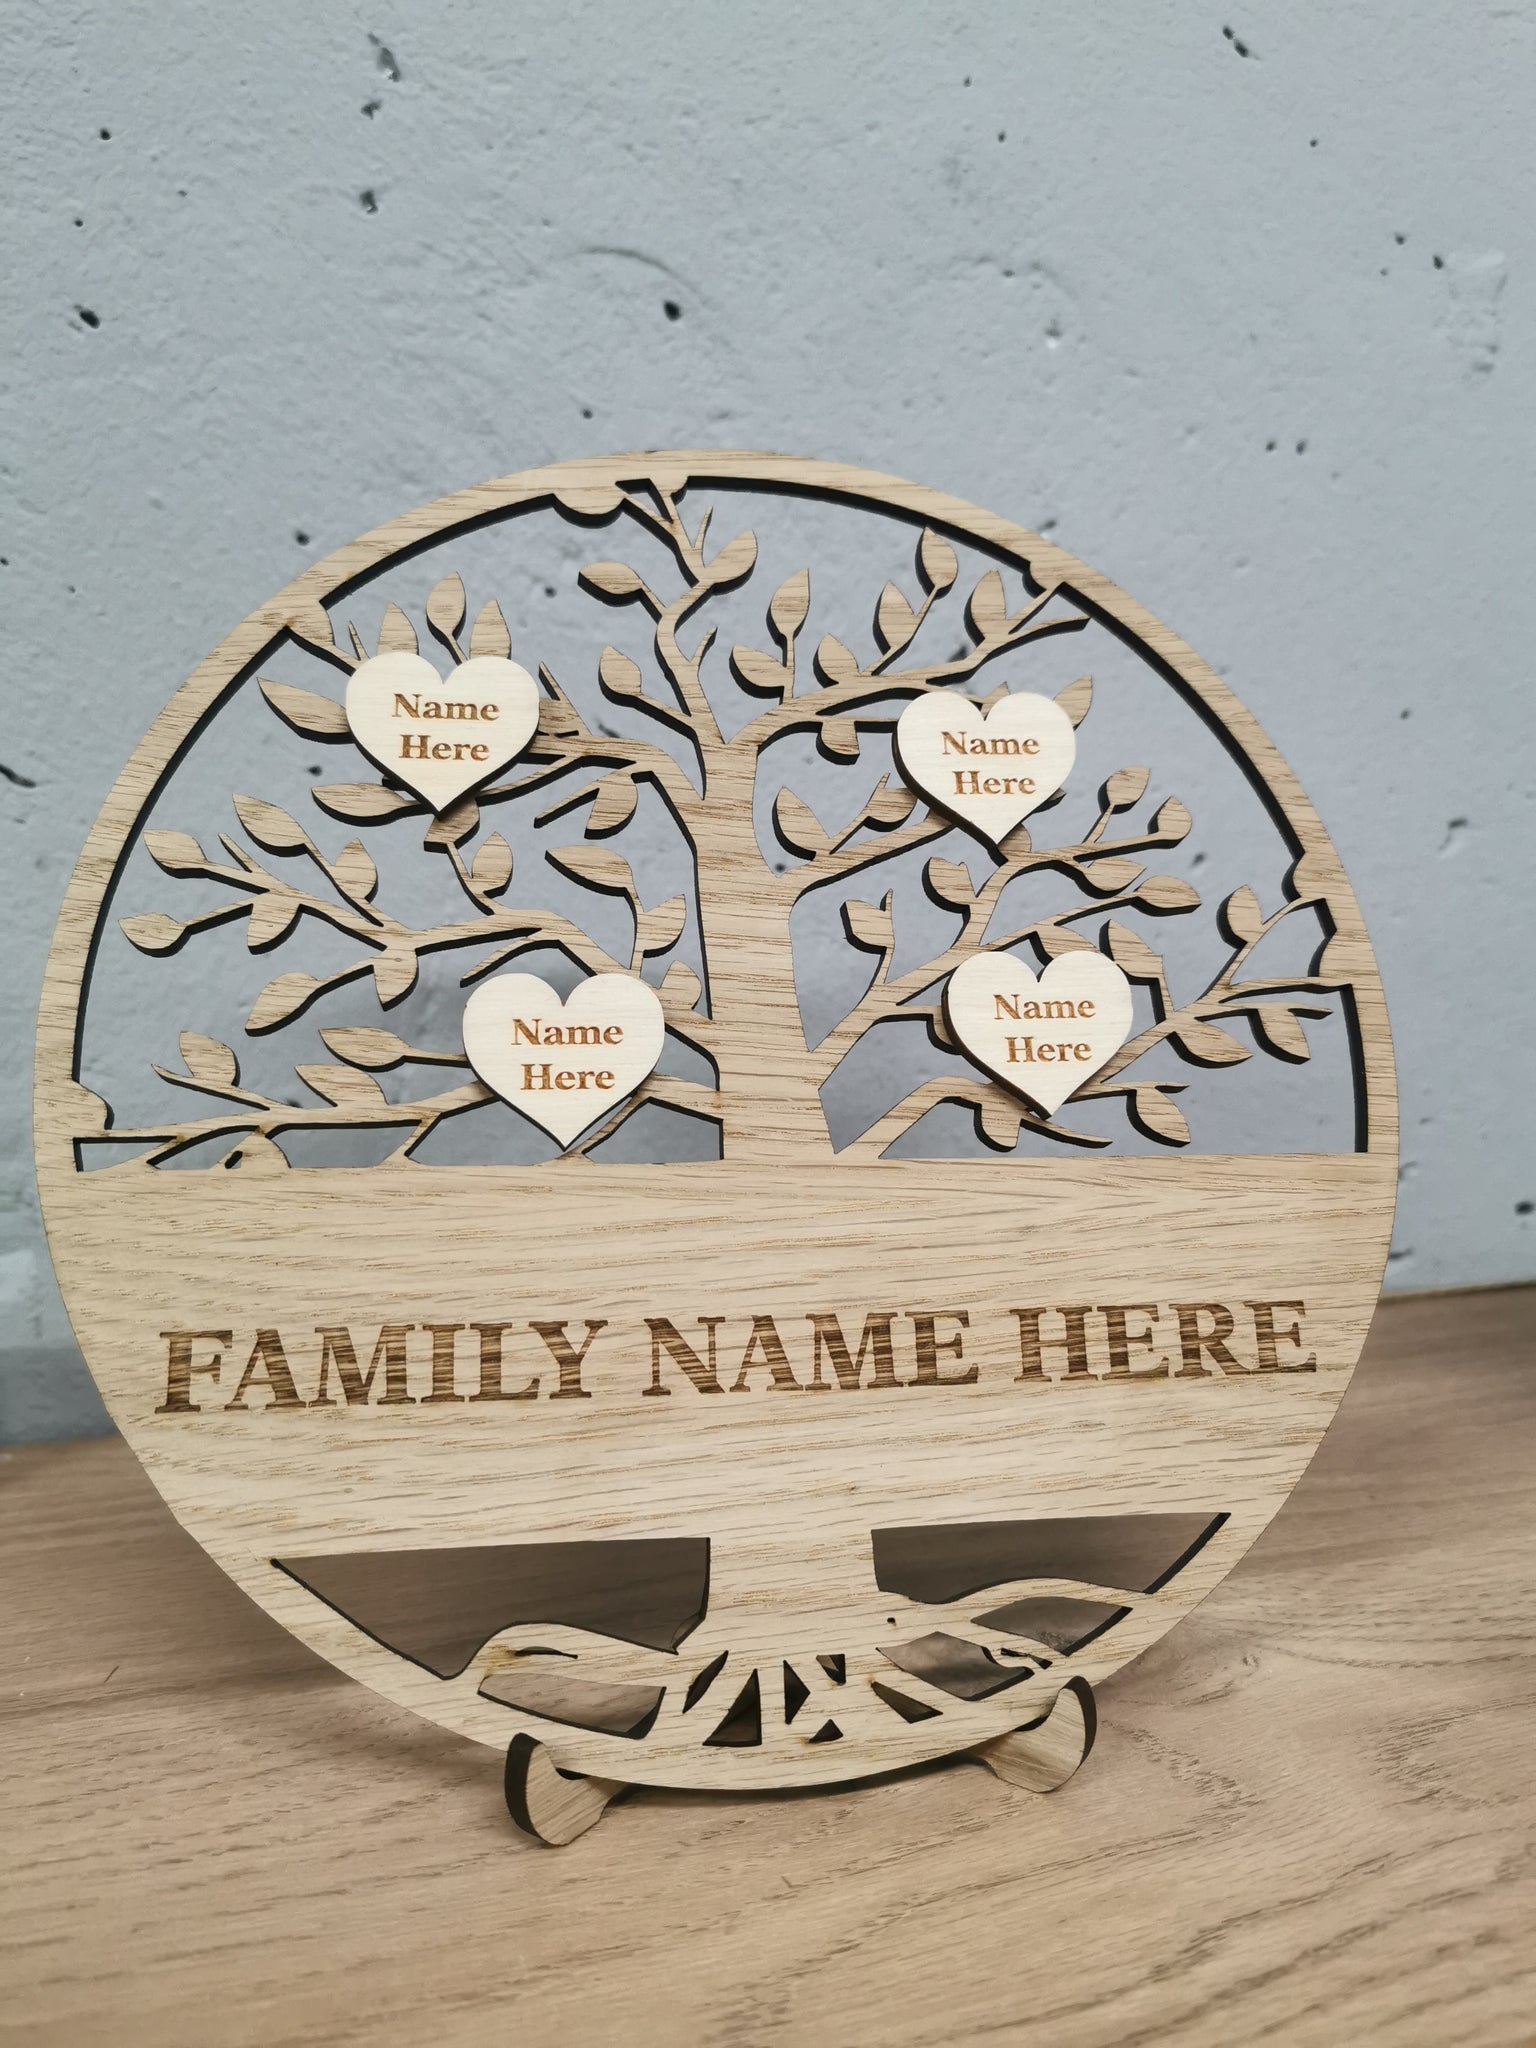 Handcrafted Wooden Family Tree Frame - A Treasured Family Heirloom